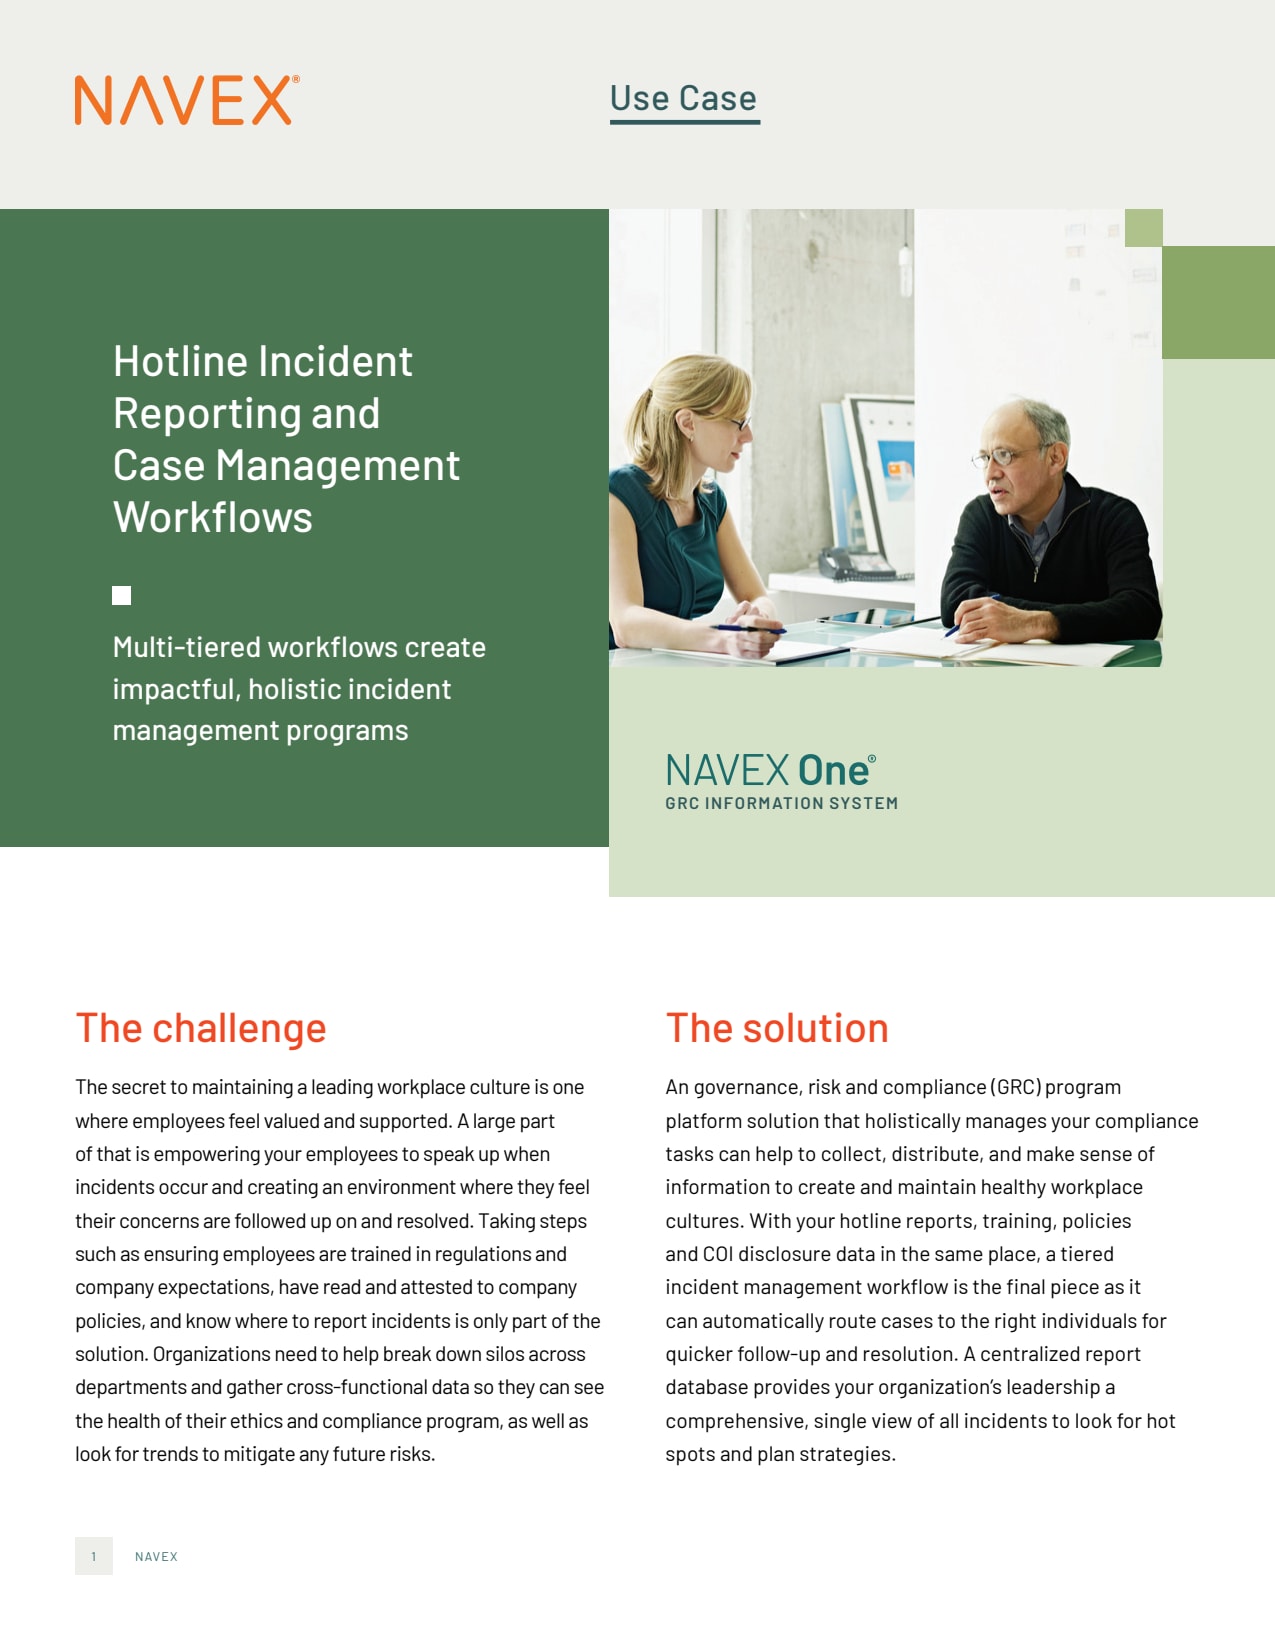 Hotline Incident Reporting and Case Management Workflows